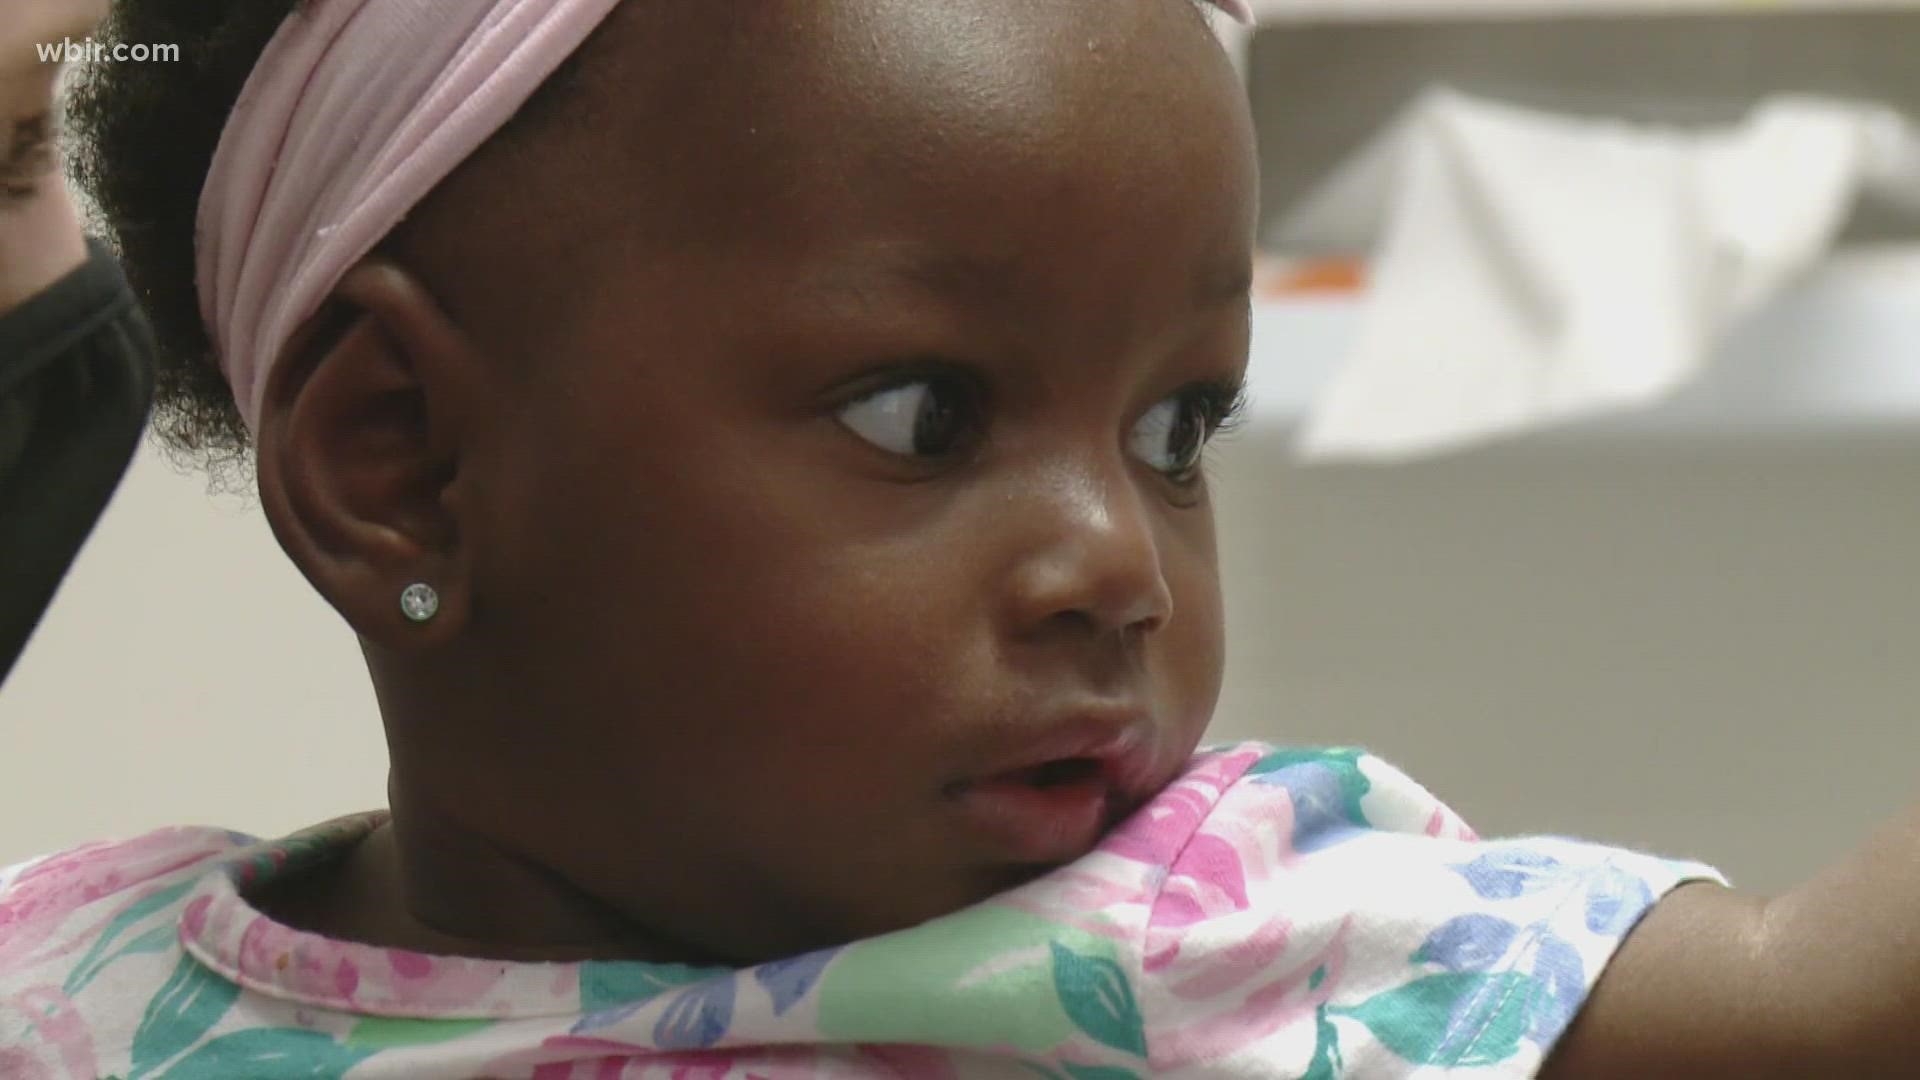 10-month-old Amira needed to have an enlarged kidney removed, and the surgery was not available in her home country.